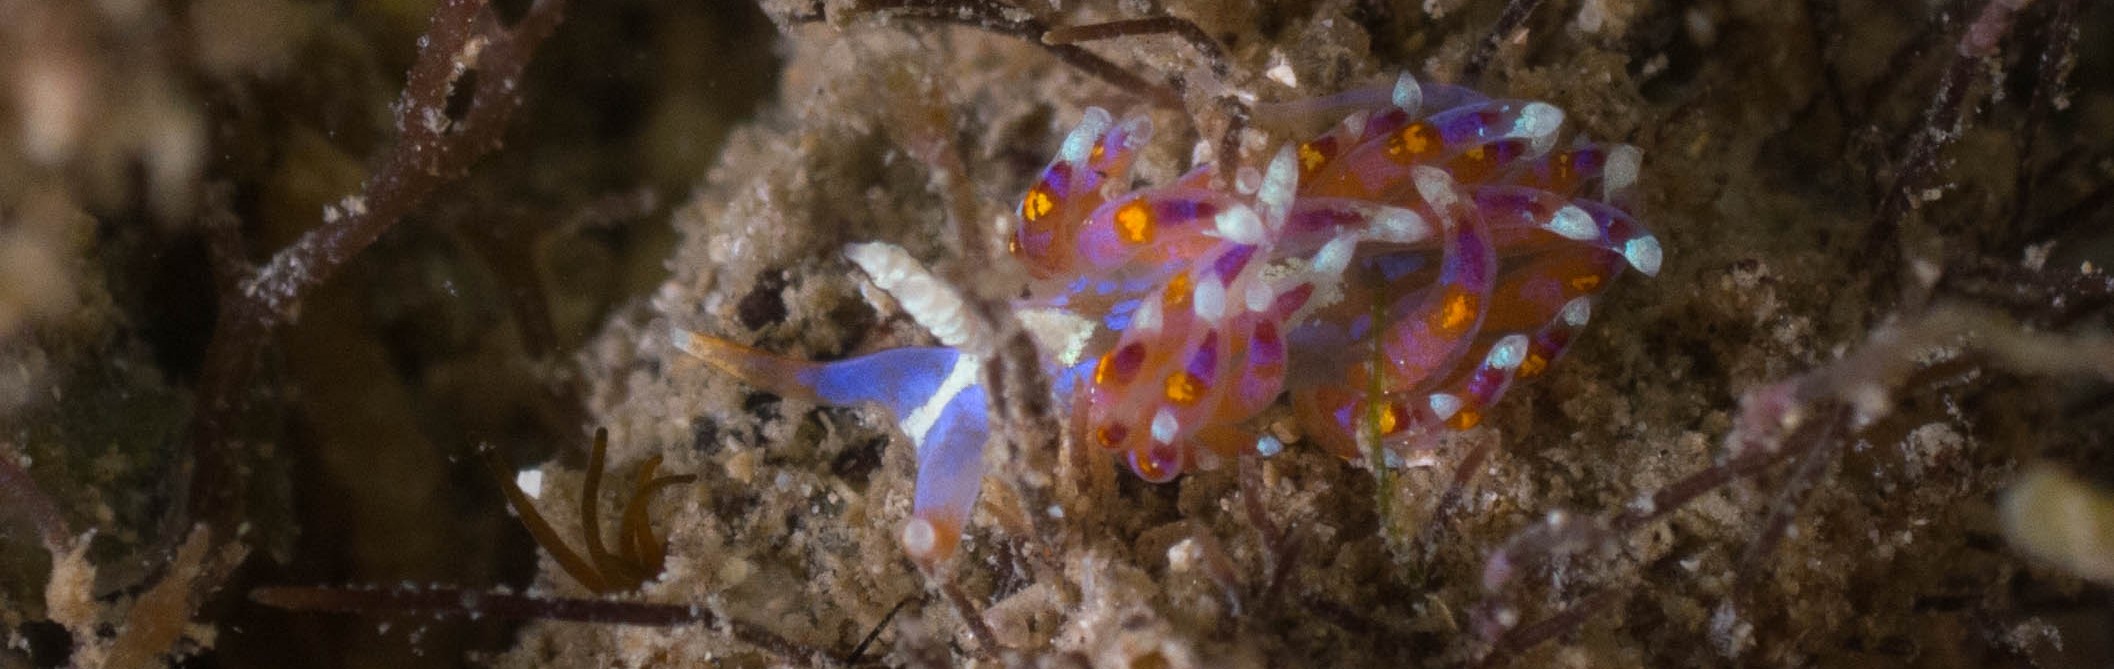 Where have all the nudibranchs gone?